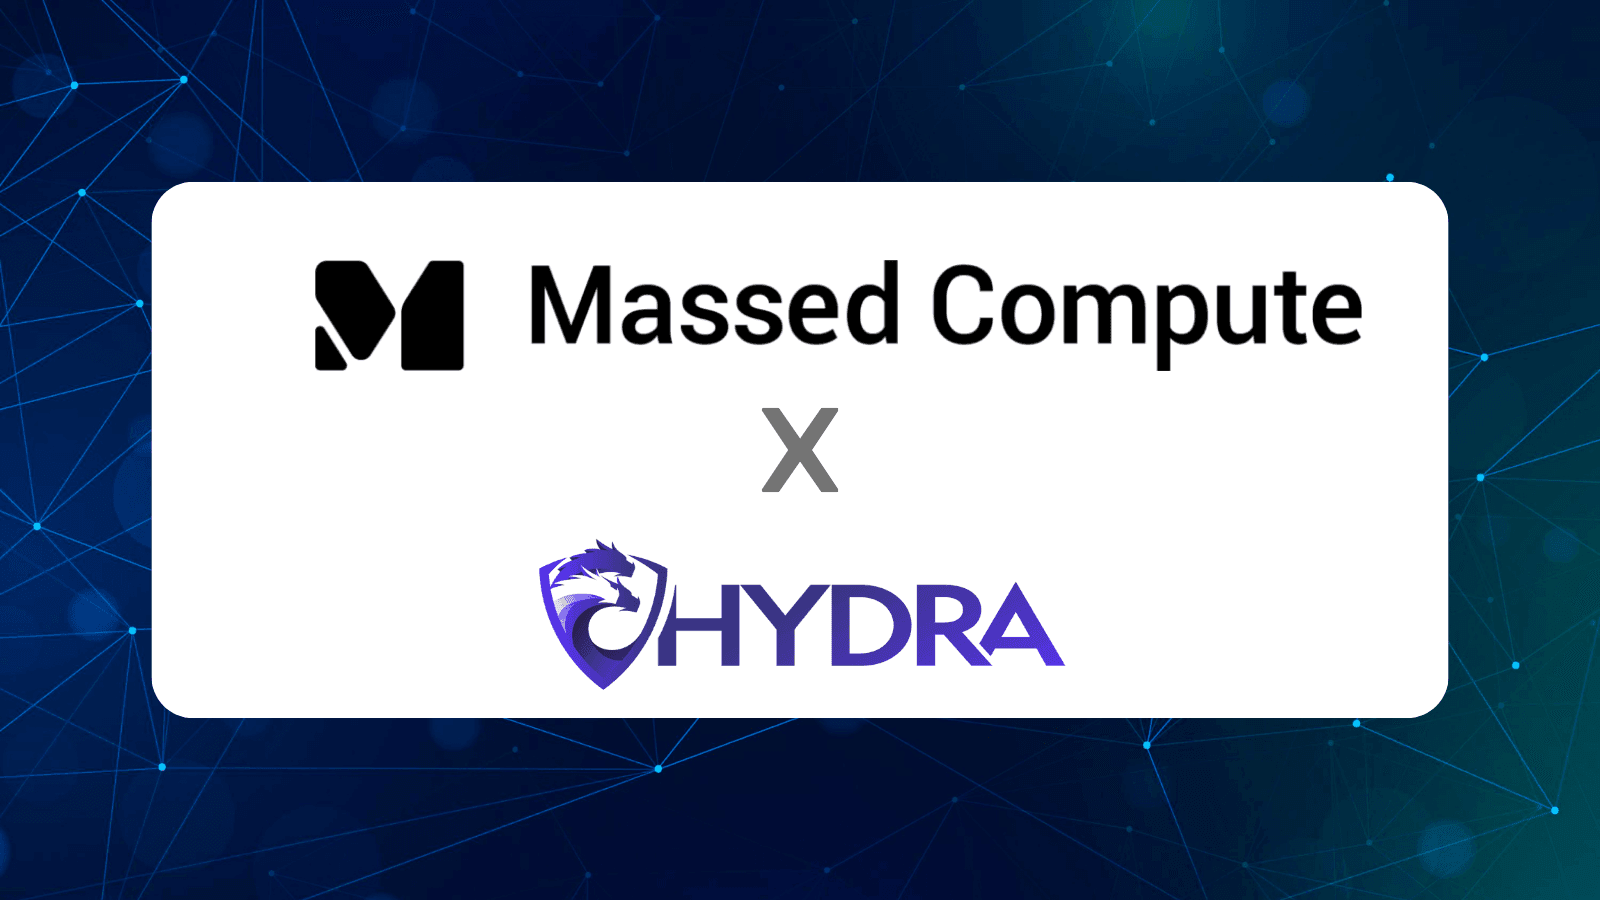 massed compute partnership with hydrahost